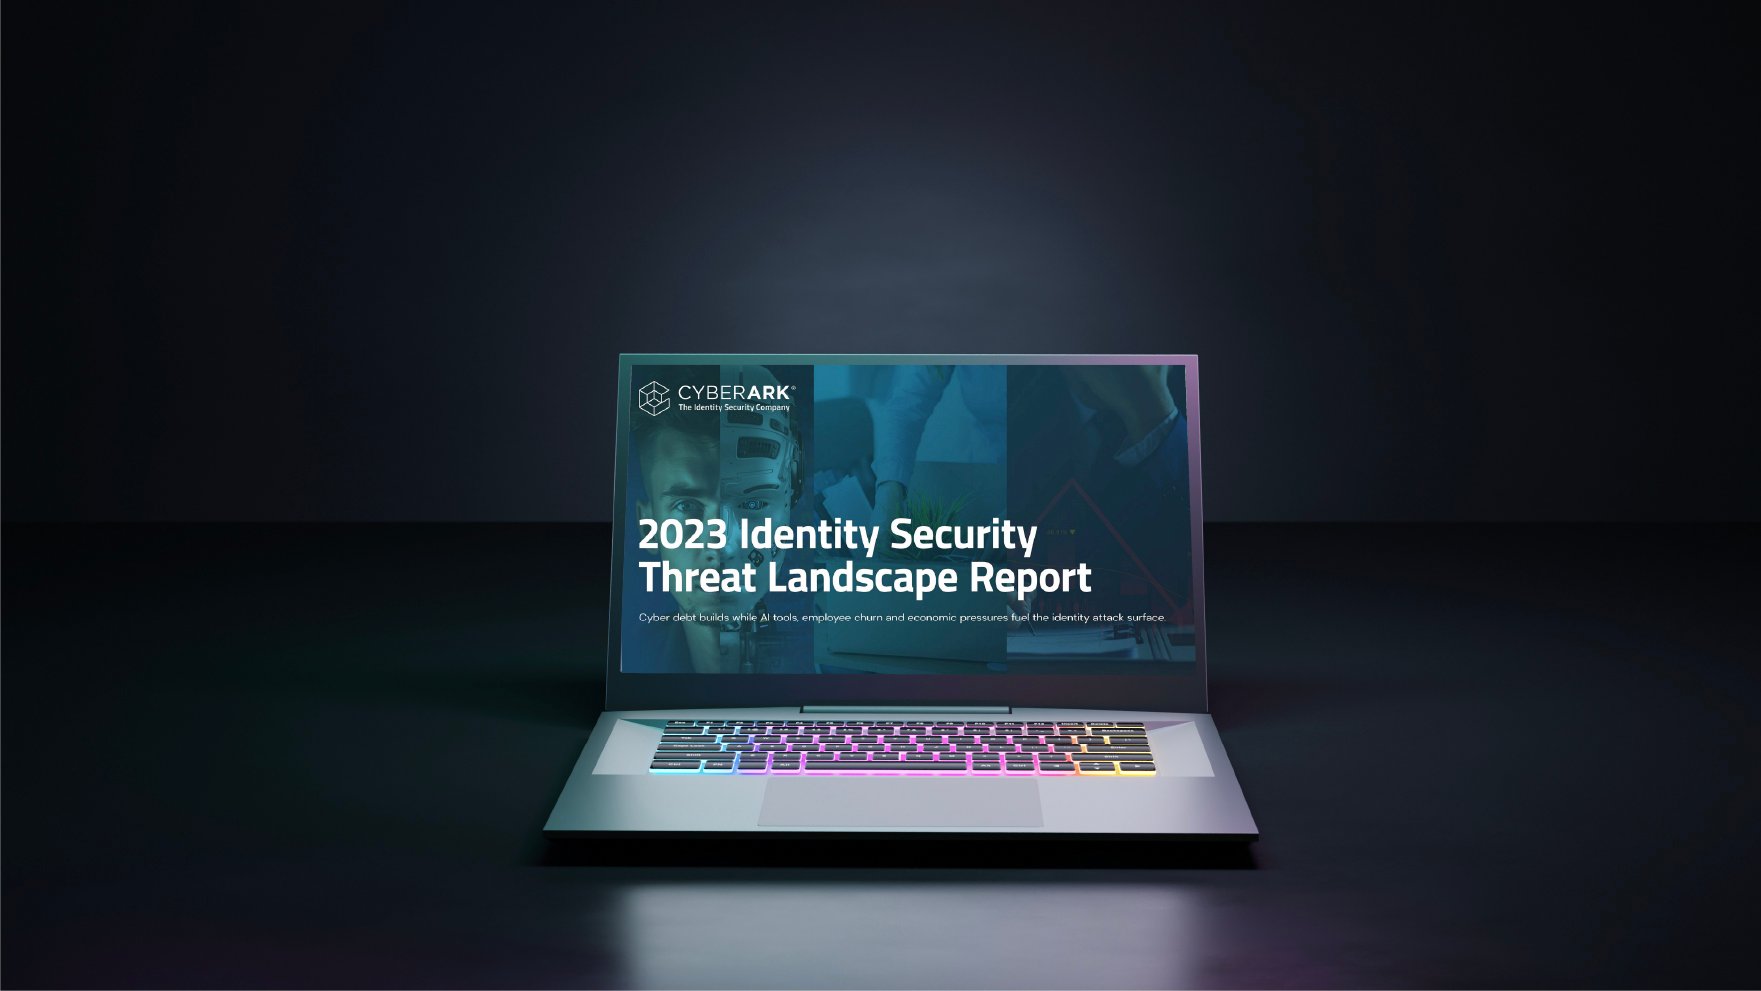 Laptop screen displaying cover of the CyberArk 2023 Identity Security Threat Landscape Report